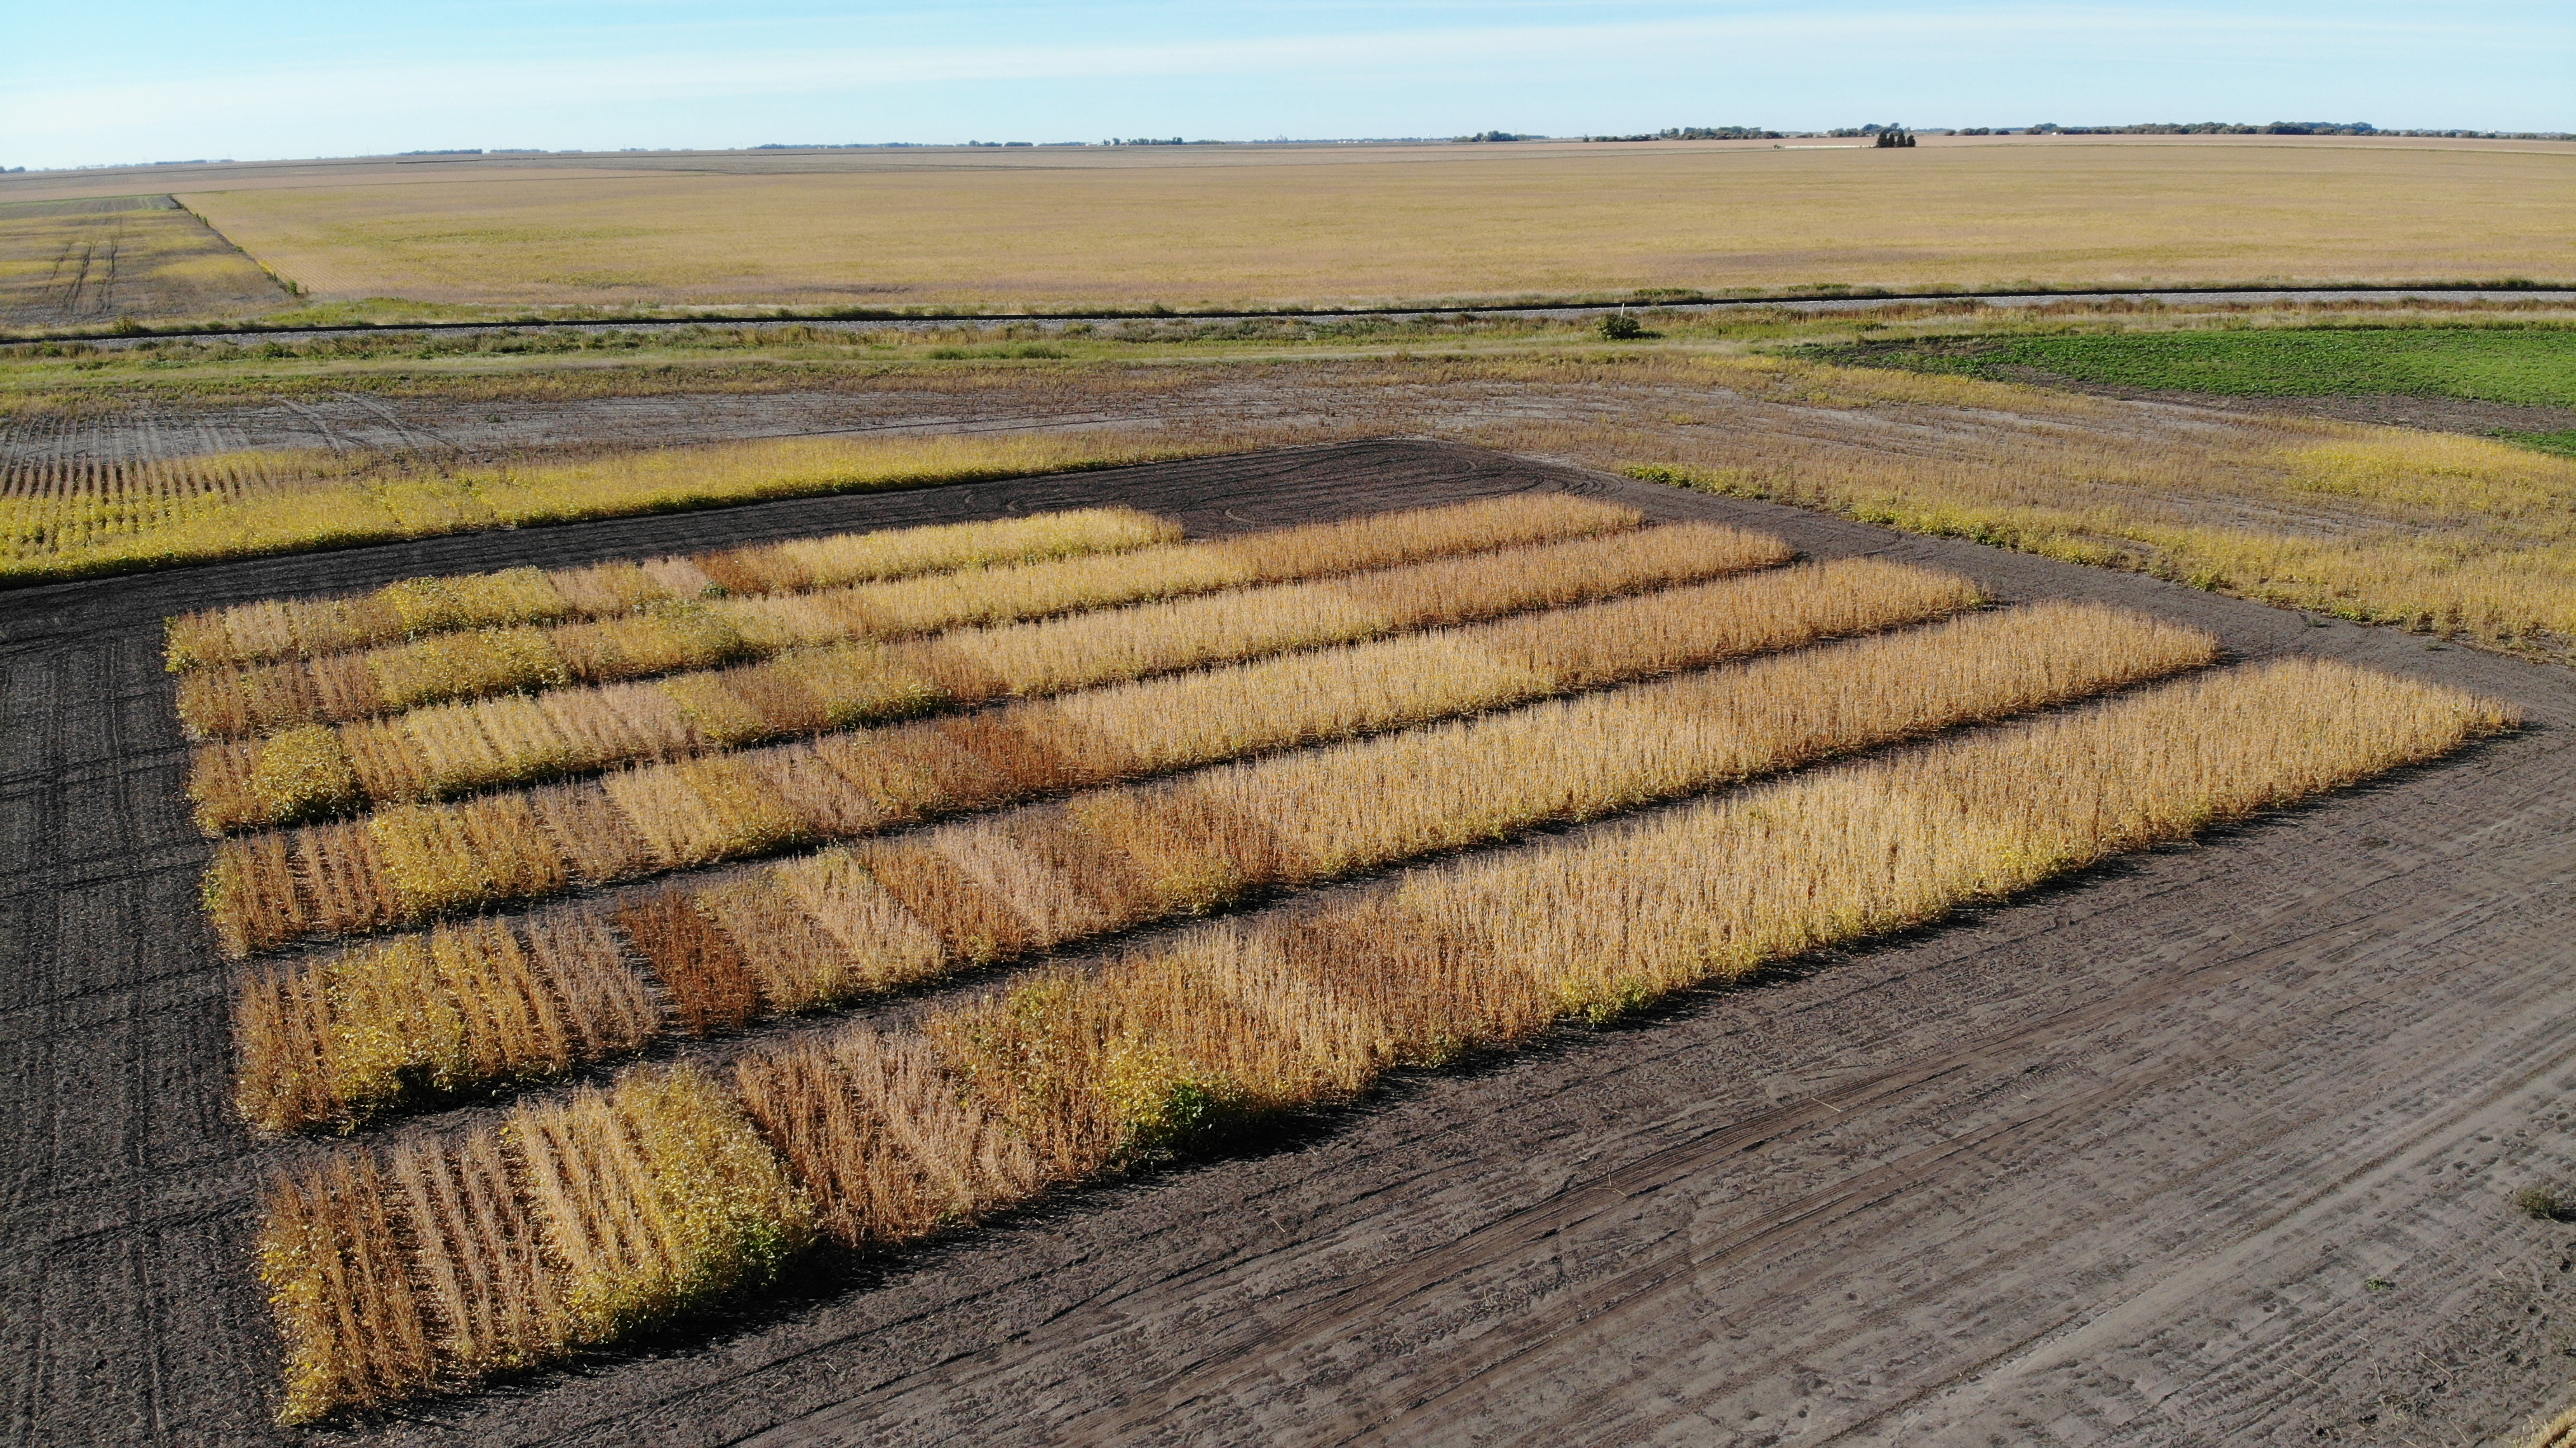 With so many varieties to choose from, variety selection can be challenging. NDSU's variety selection tool is designed to assist farmers with finding the most appropriate variety for their farm by accessing, sorting and visualizing variety trial data. (NDSU photo)